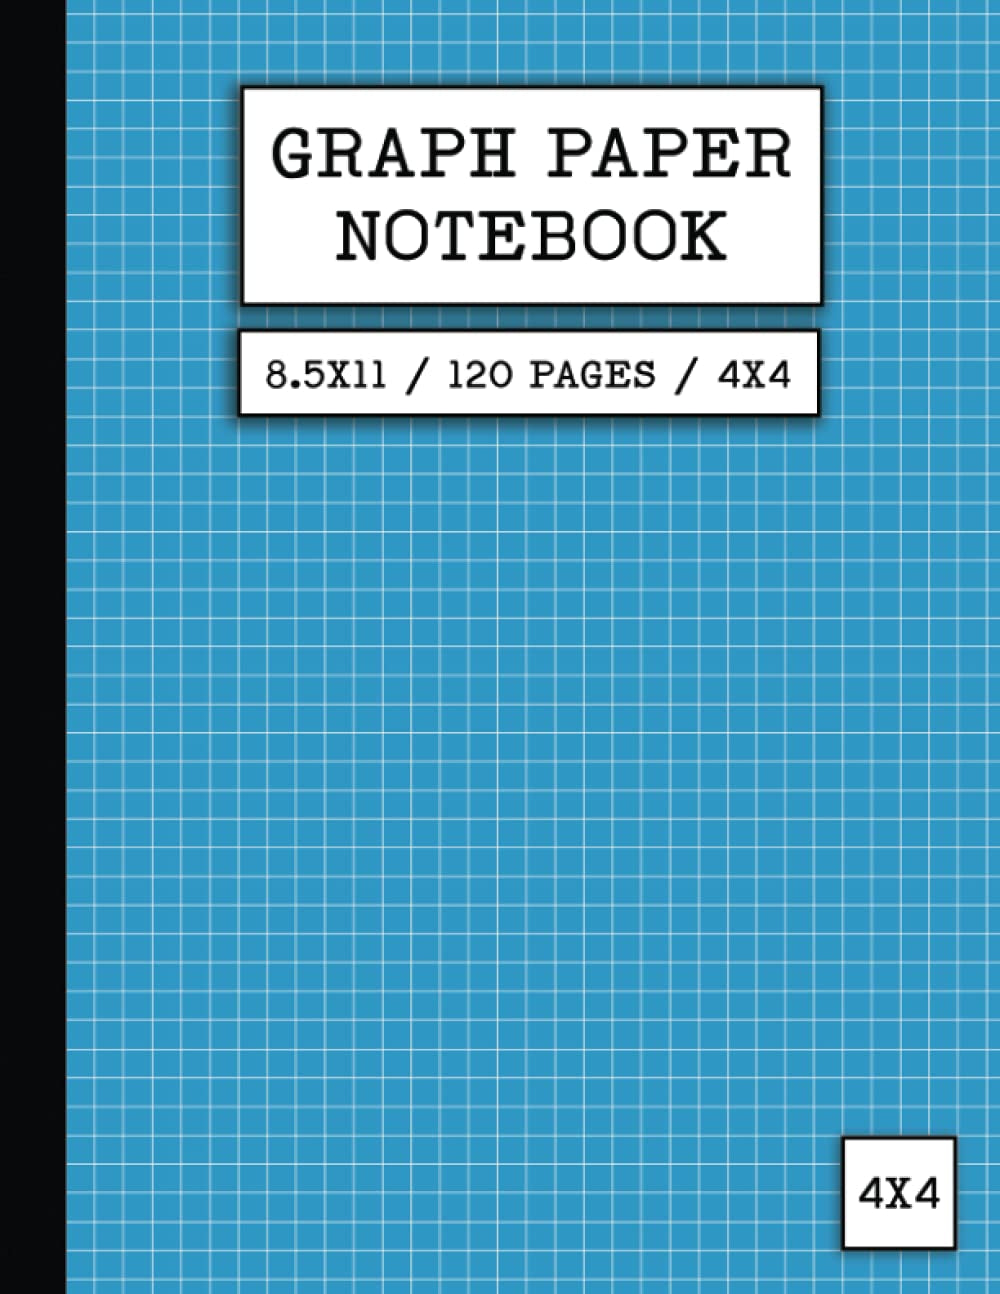 Graph Paper Notebook 8.5 X 11 / 120 Pages / 4X4: Composition Exercise Book - Grid Paper 4 Squares per Inch - for School, Engineering Work, Drawing & ... Students (Notebooks for Education & Work)